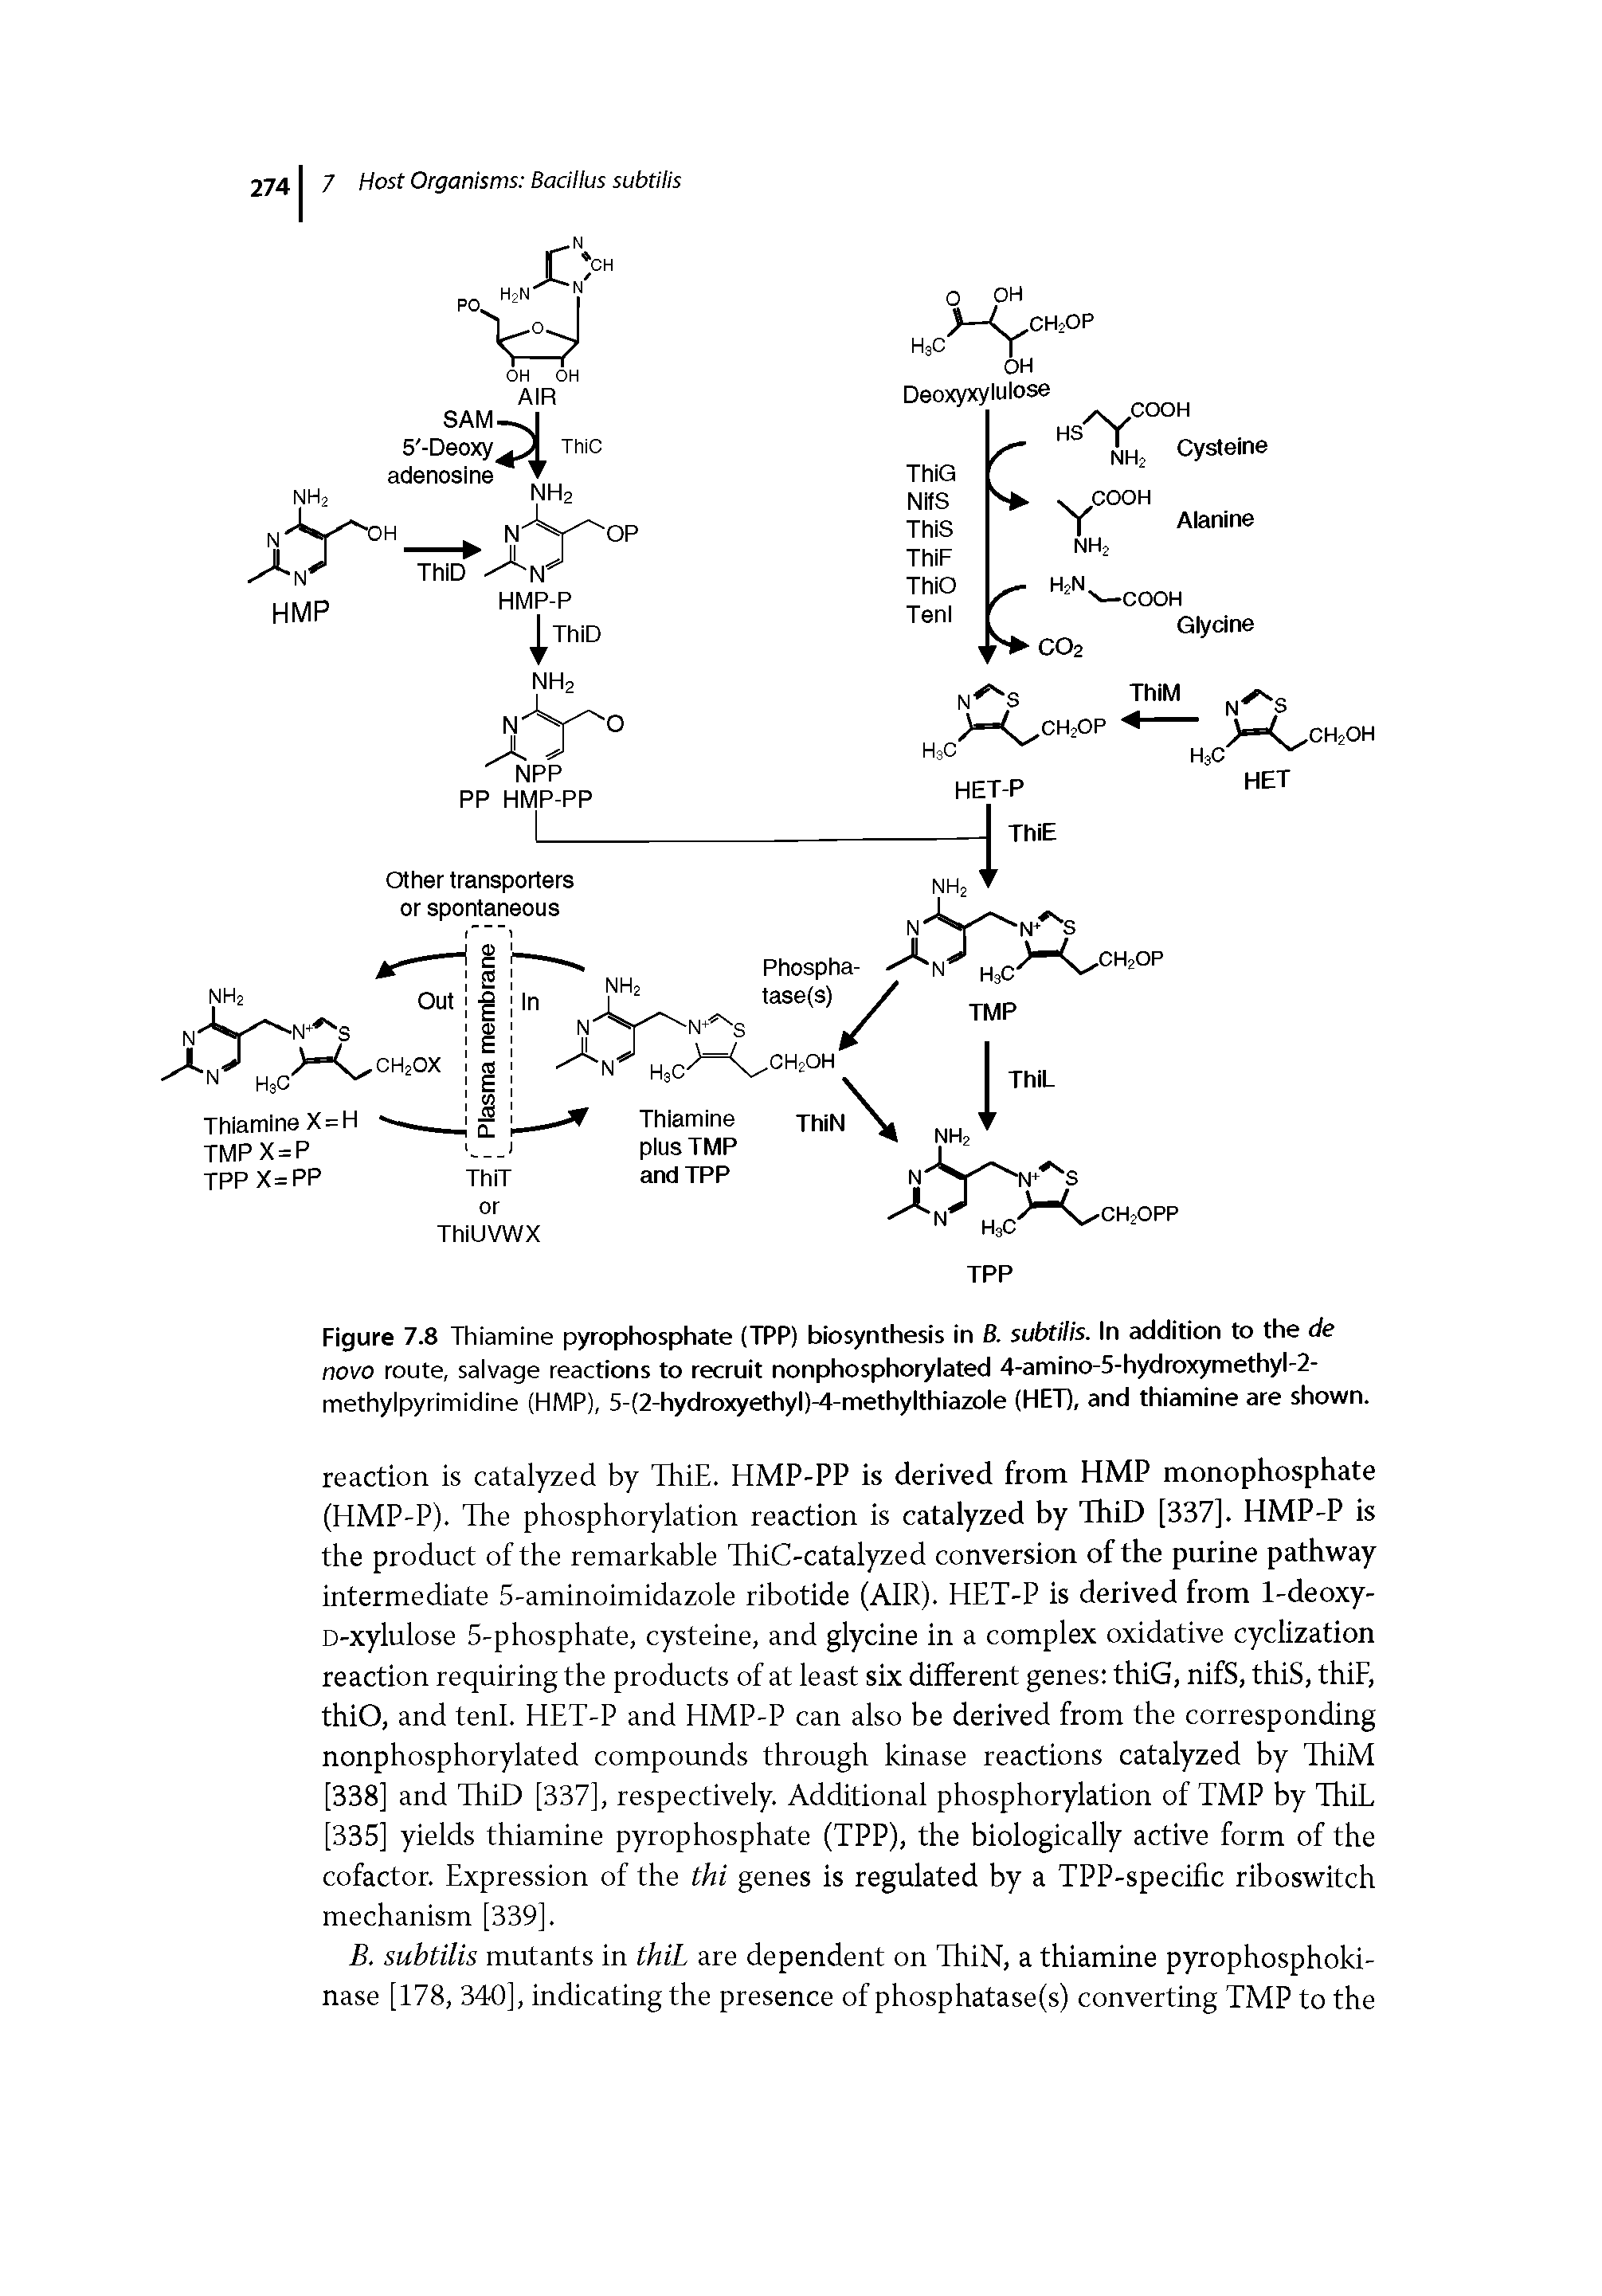 Figure 7.8 Thiamine pyrophosphate (TPP) biosynthesis in 8. subtilis. in addition to the de novo route, salvage reactions to recruit nonphosphorylated 4-amino-5-hydroxymethyl-2-methylpyrimidine (HMP), 5-(2-hydroxyethyl)-4-methylthiazole (HET), and thiamine are shown.